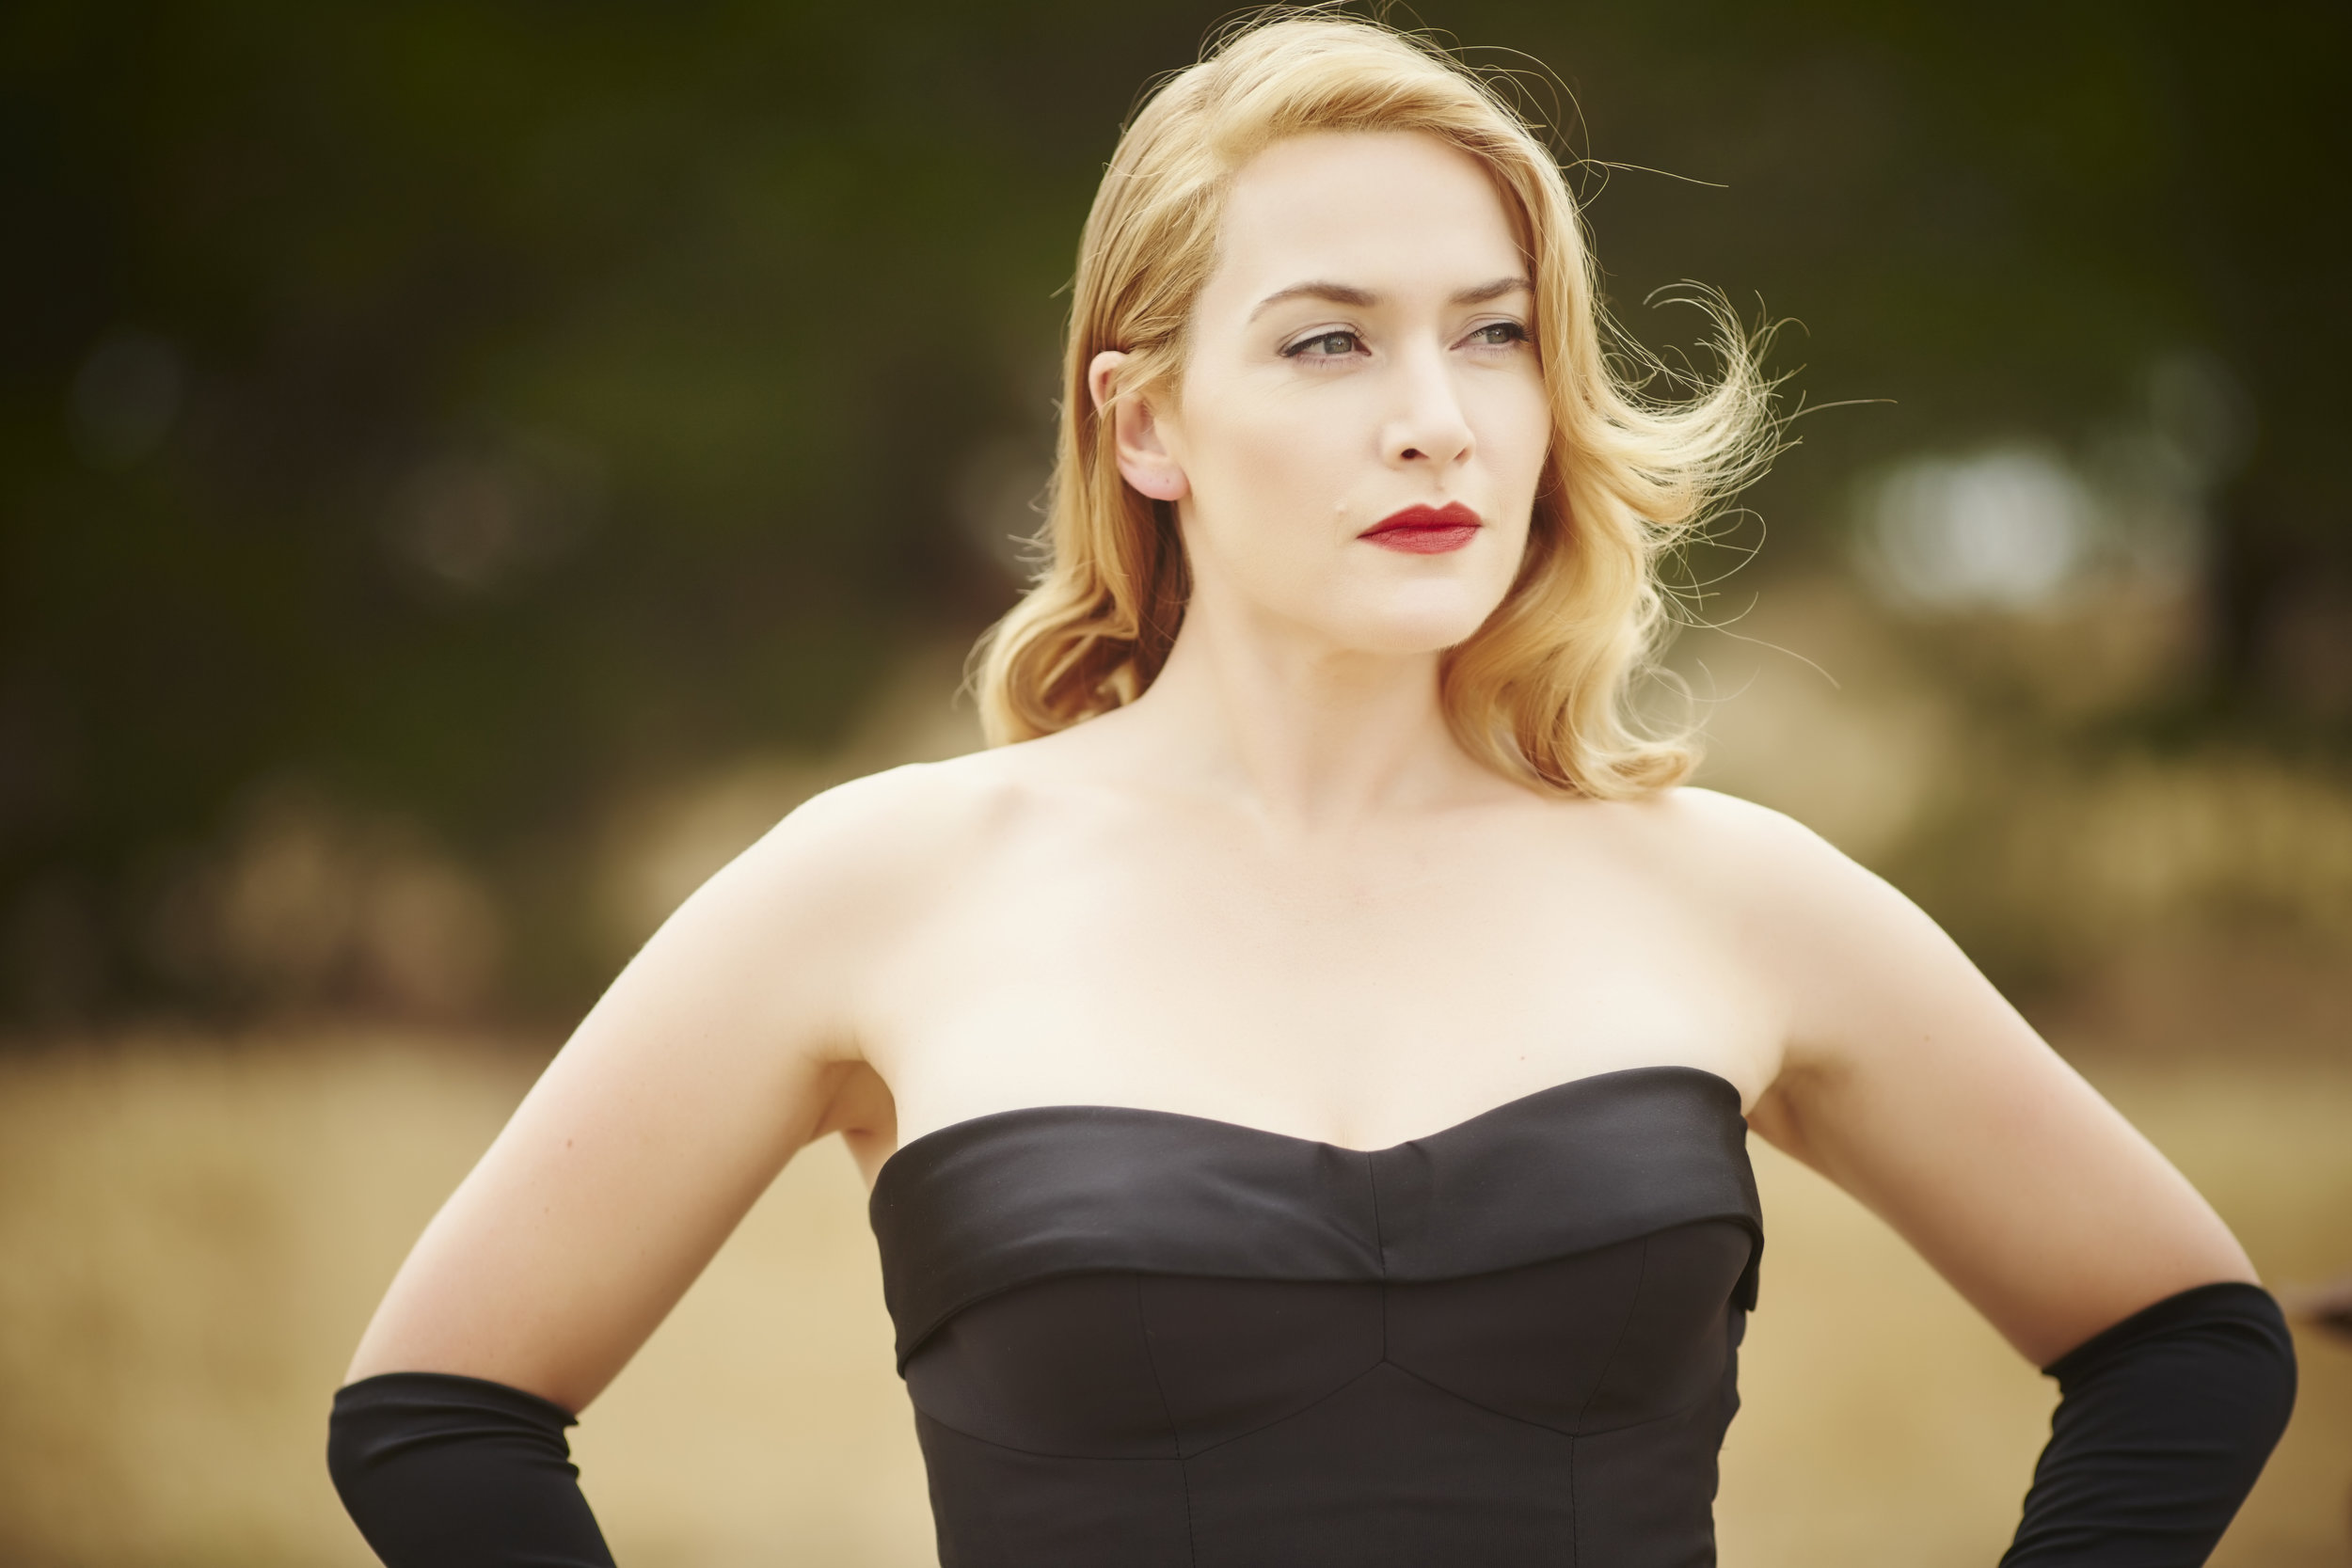 Review: “The Dressmaker” or how to set the scene, by Smileygoats